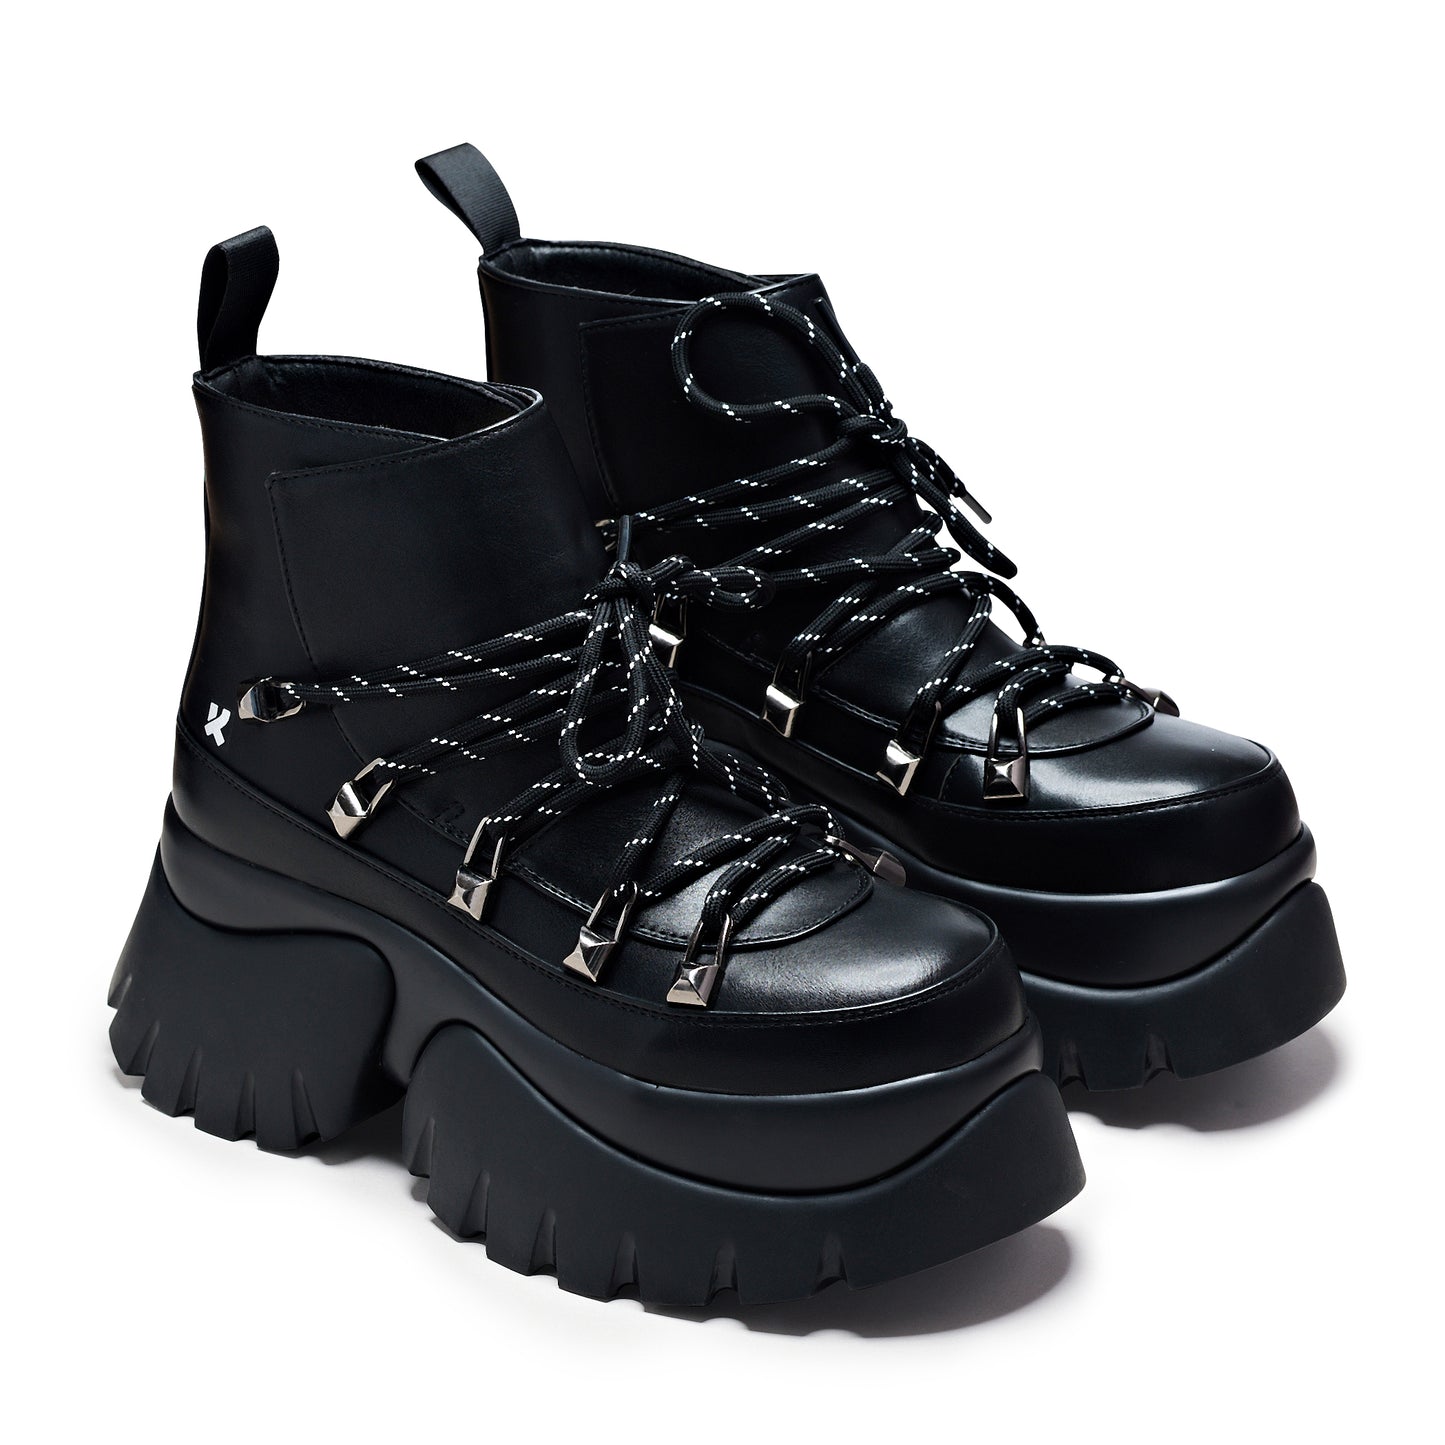 Sigmar Chunky Hiking Boots - Ankle Boots - KOI Footwear - Black - Three-Quarter View